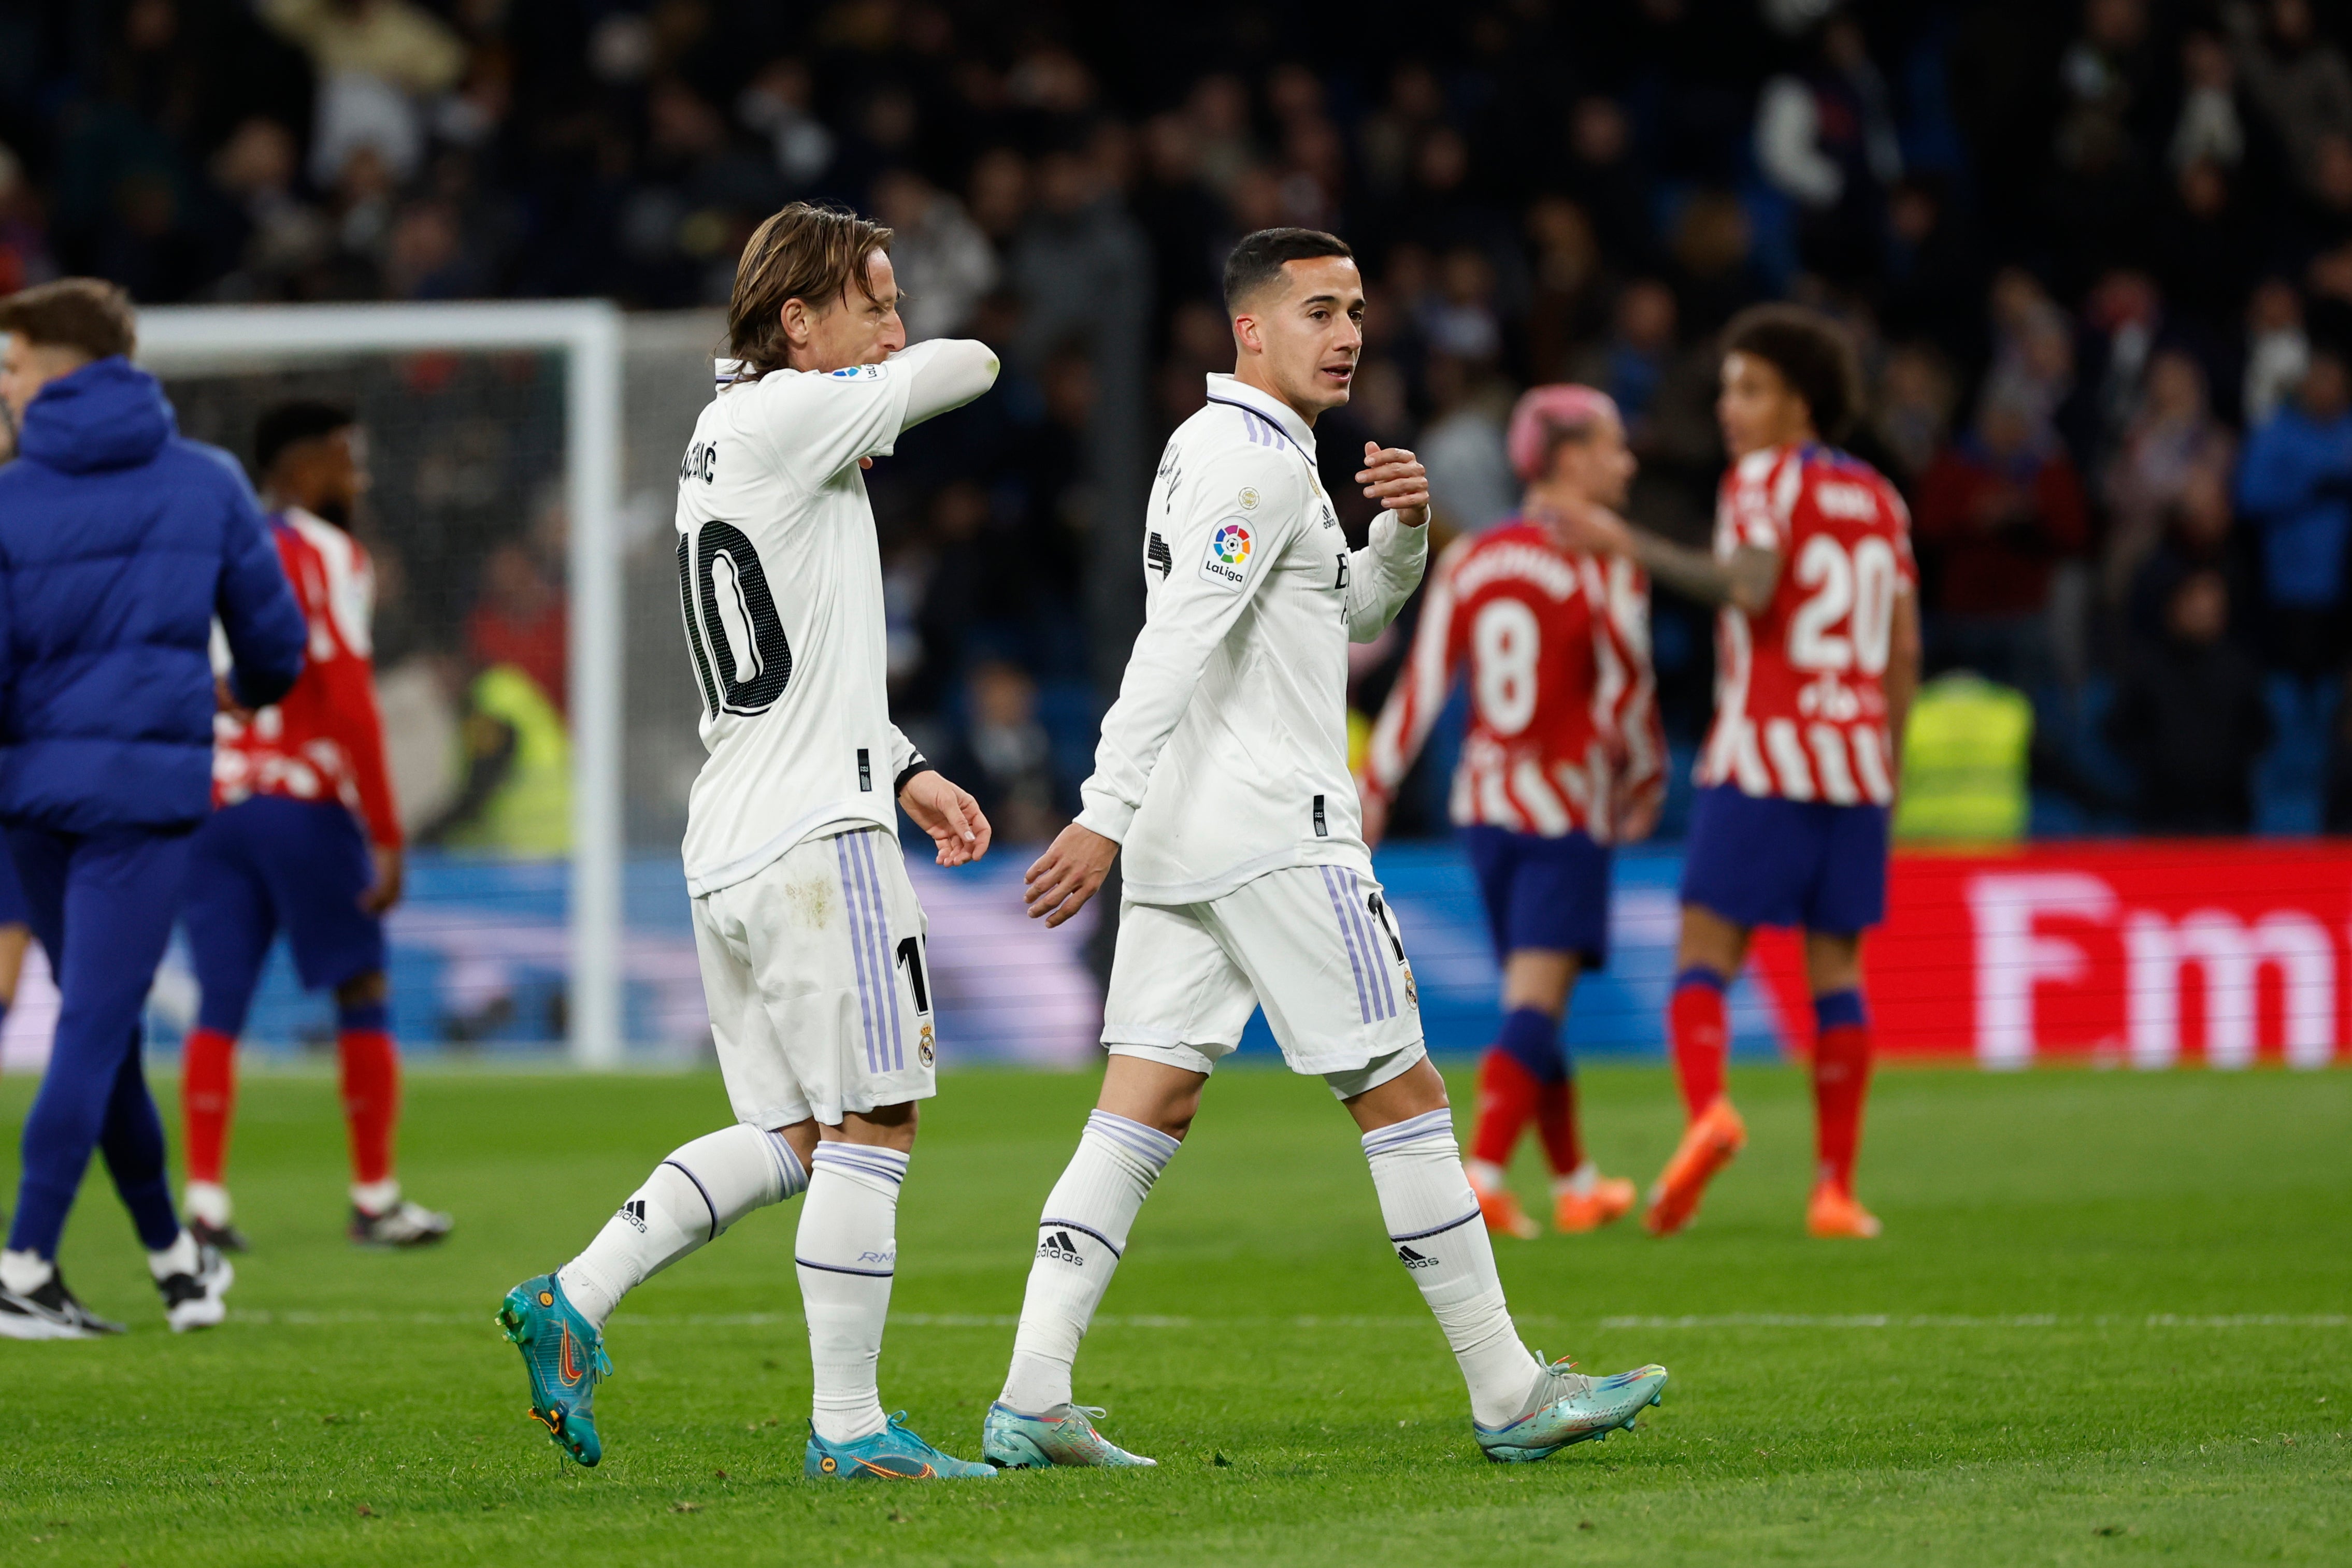 Real Madrid dominated by local rival Atlético Madrid in 3-1 derby loss